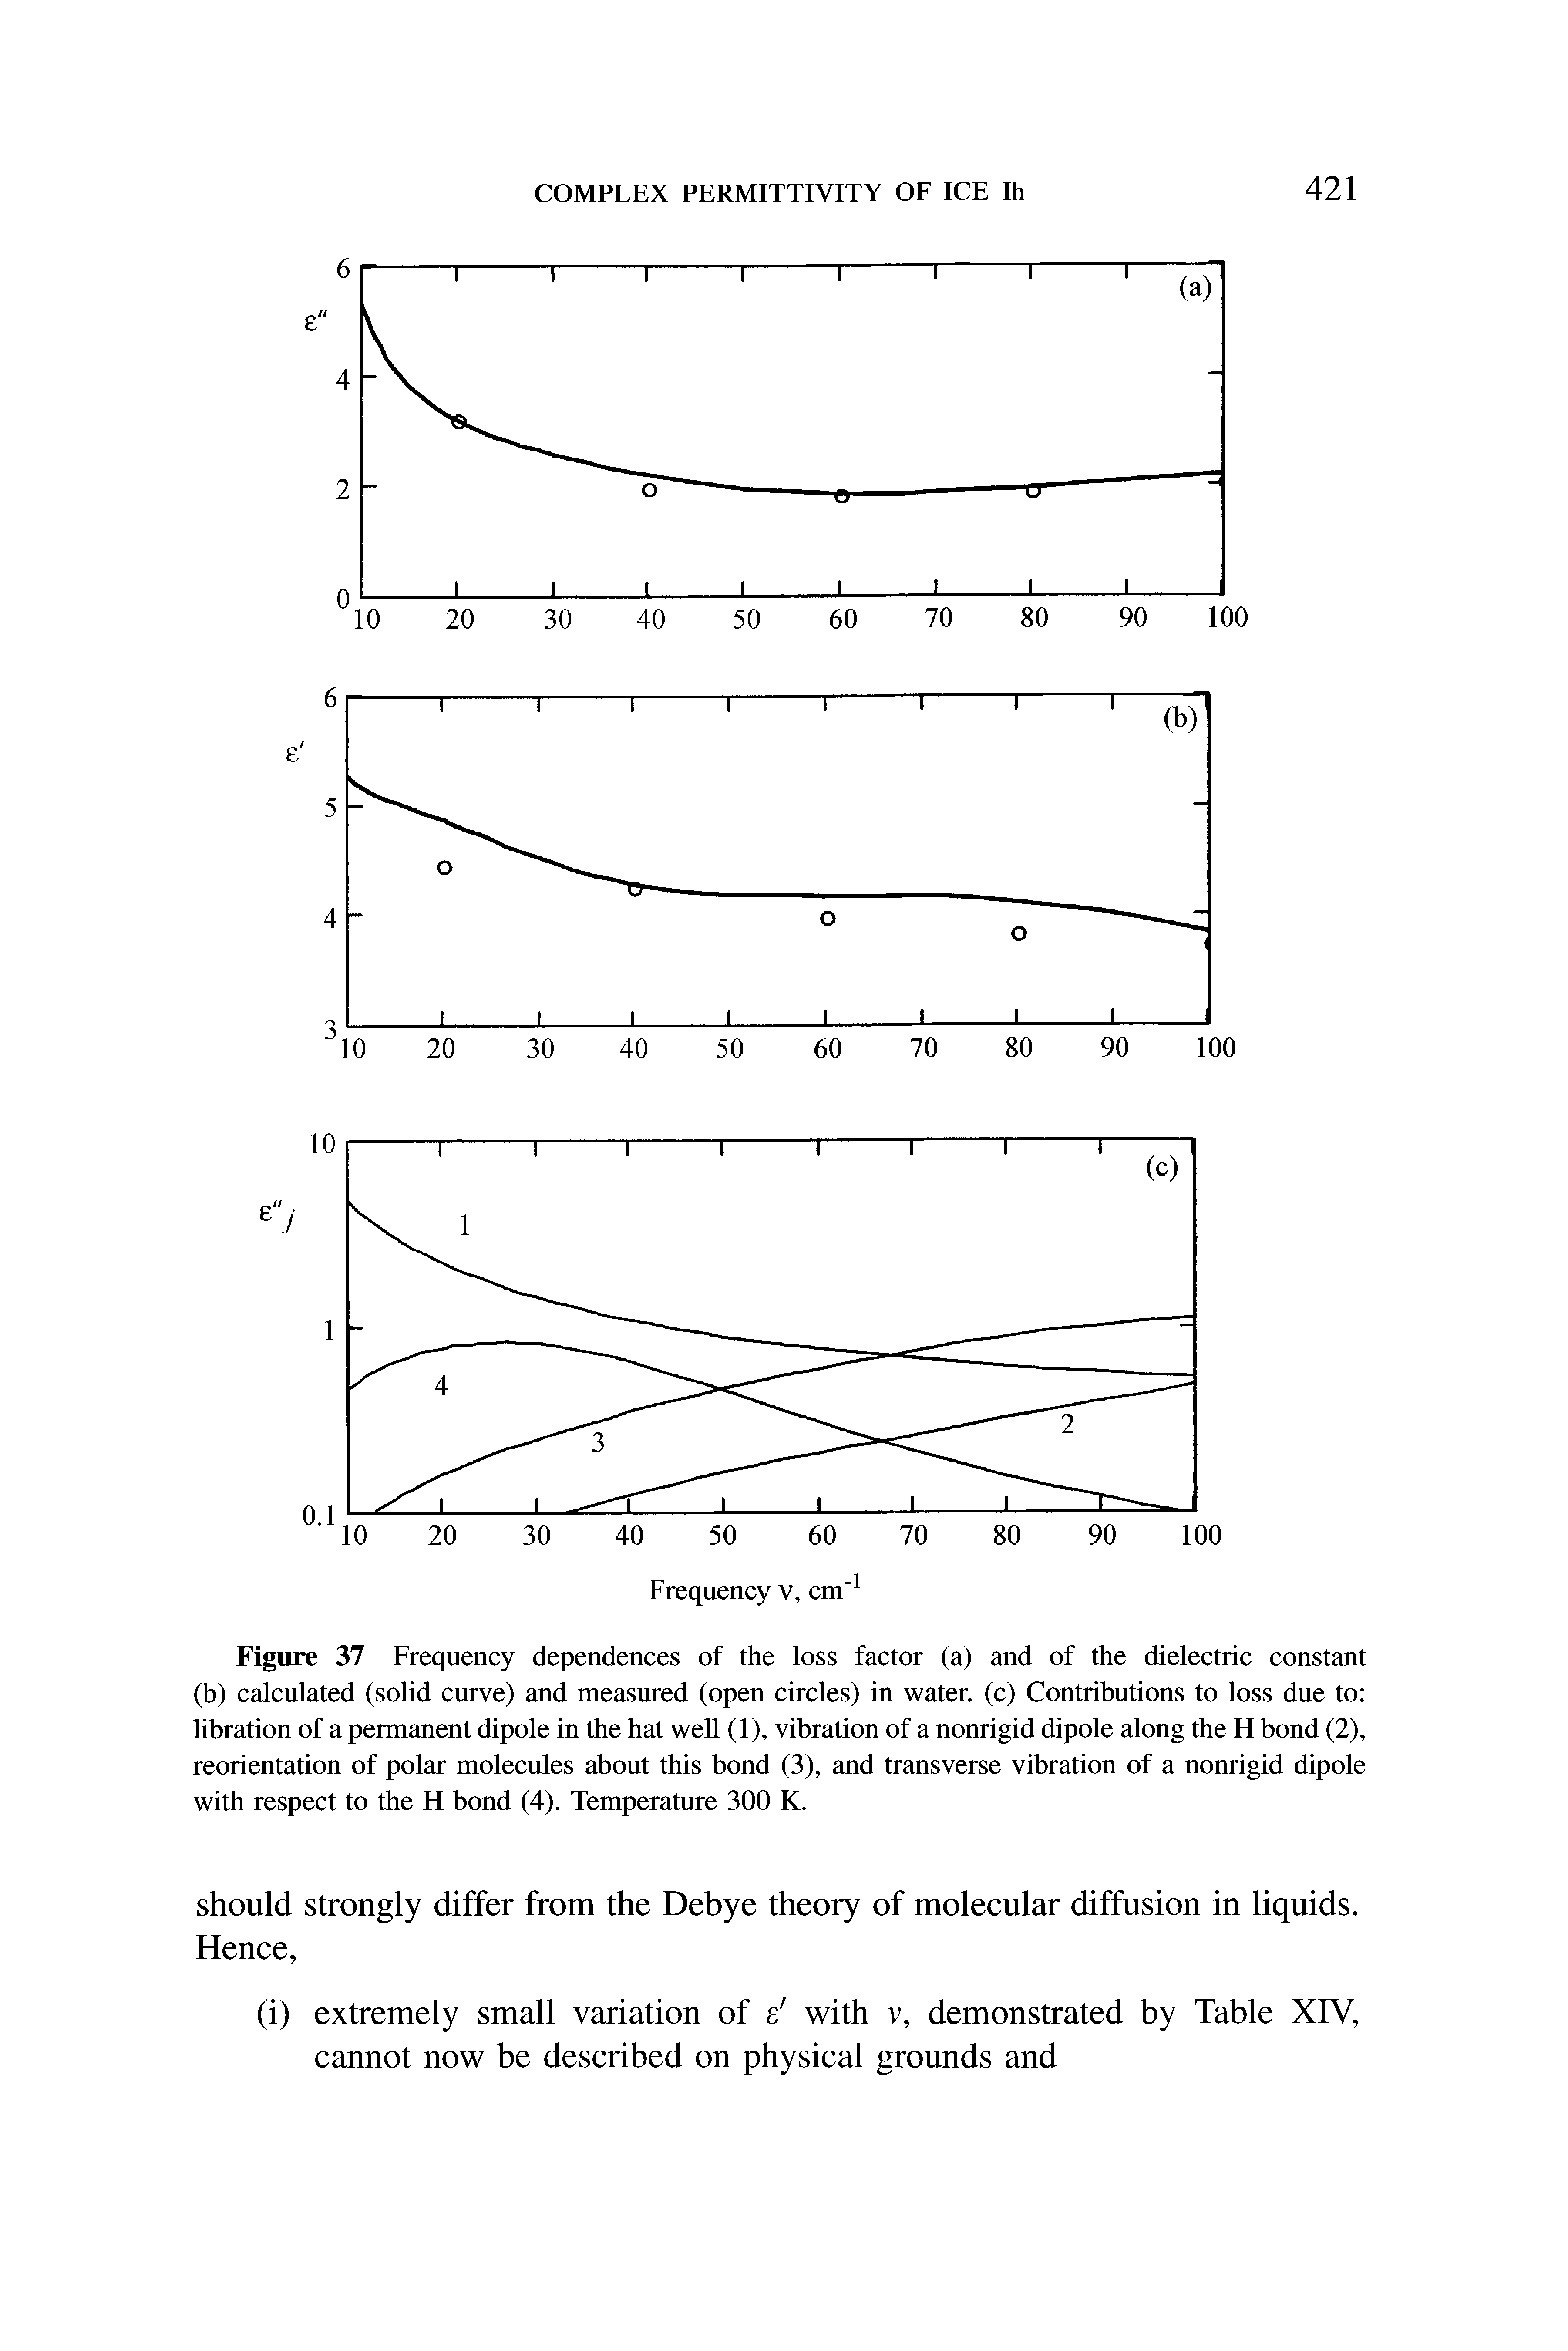 Figure 37 Frequency dependences of the loss factor (a) and of the dielectric constant (b) calculated (solid curve) and measured (open circles) in water, (c) Contributions to loss due to libration of a permanent dipole in the hat well (1), vibration of a nonrigid dipole along the H bond (2), reorientation of polar molecules about this bond (3), and transverse vibration of a nonrigid dipole with respect to the H bond (4). Temperature 300 K.